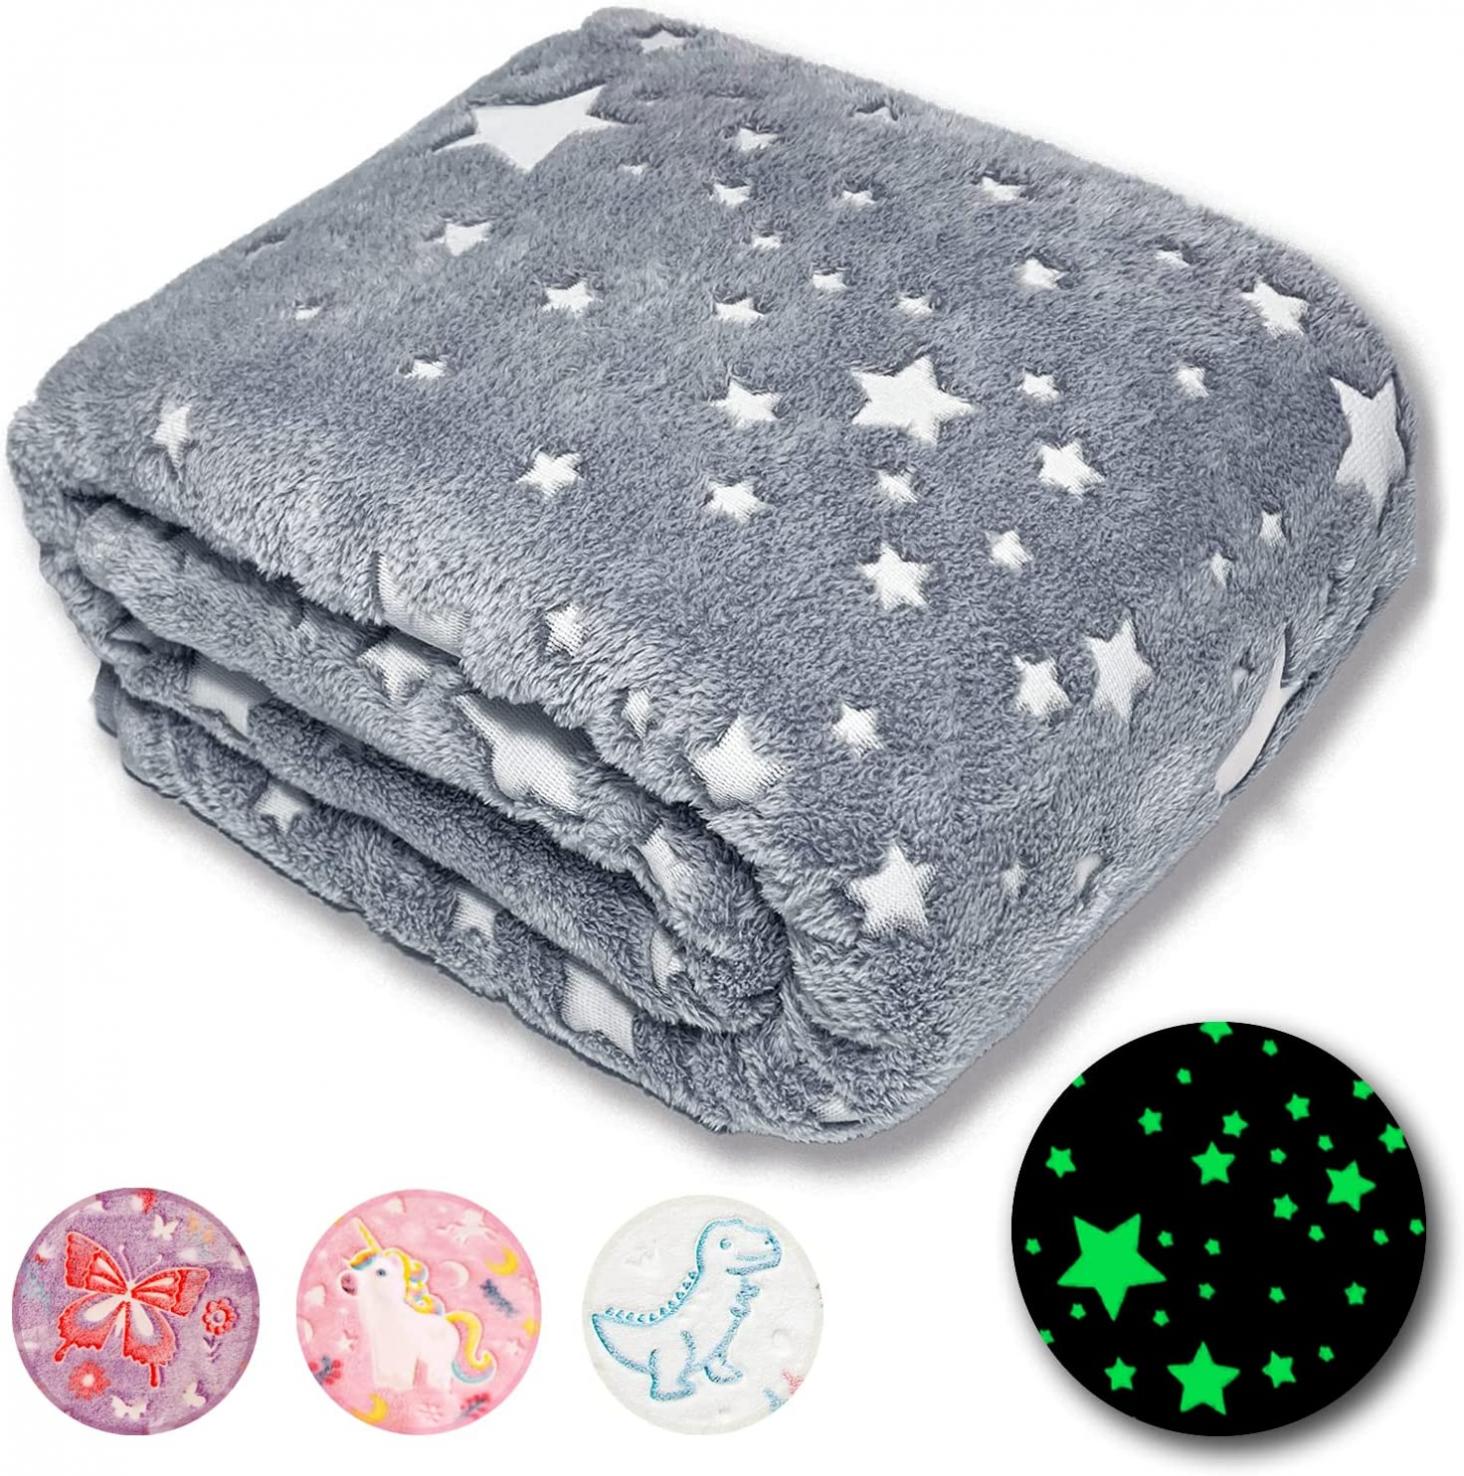 FORESTAR Glow in The Dark Blanket, Christmas Birthday Gifts for Kids, Premium Super Soft Warm Cozy Furry Throw Blanket, Unique Gifts for Boys Girls Grandkids Teens, 50"×60" Stars Gray